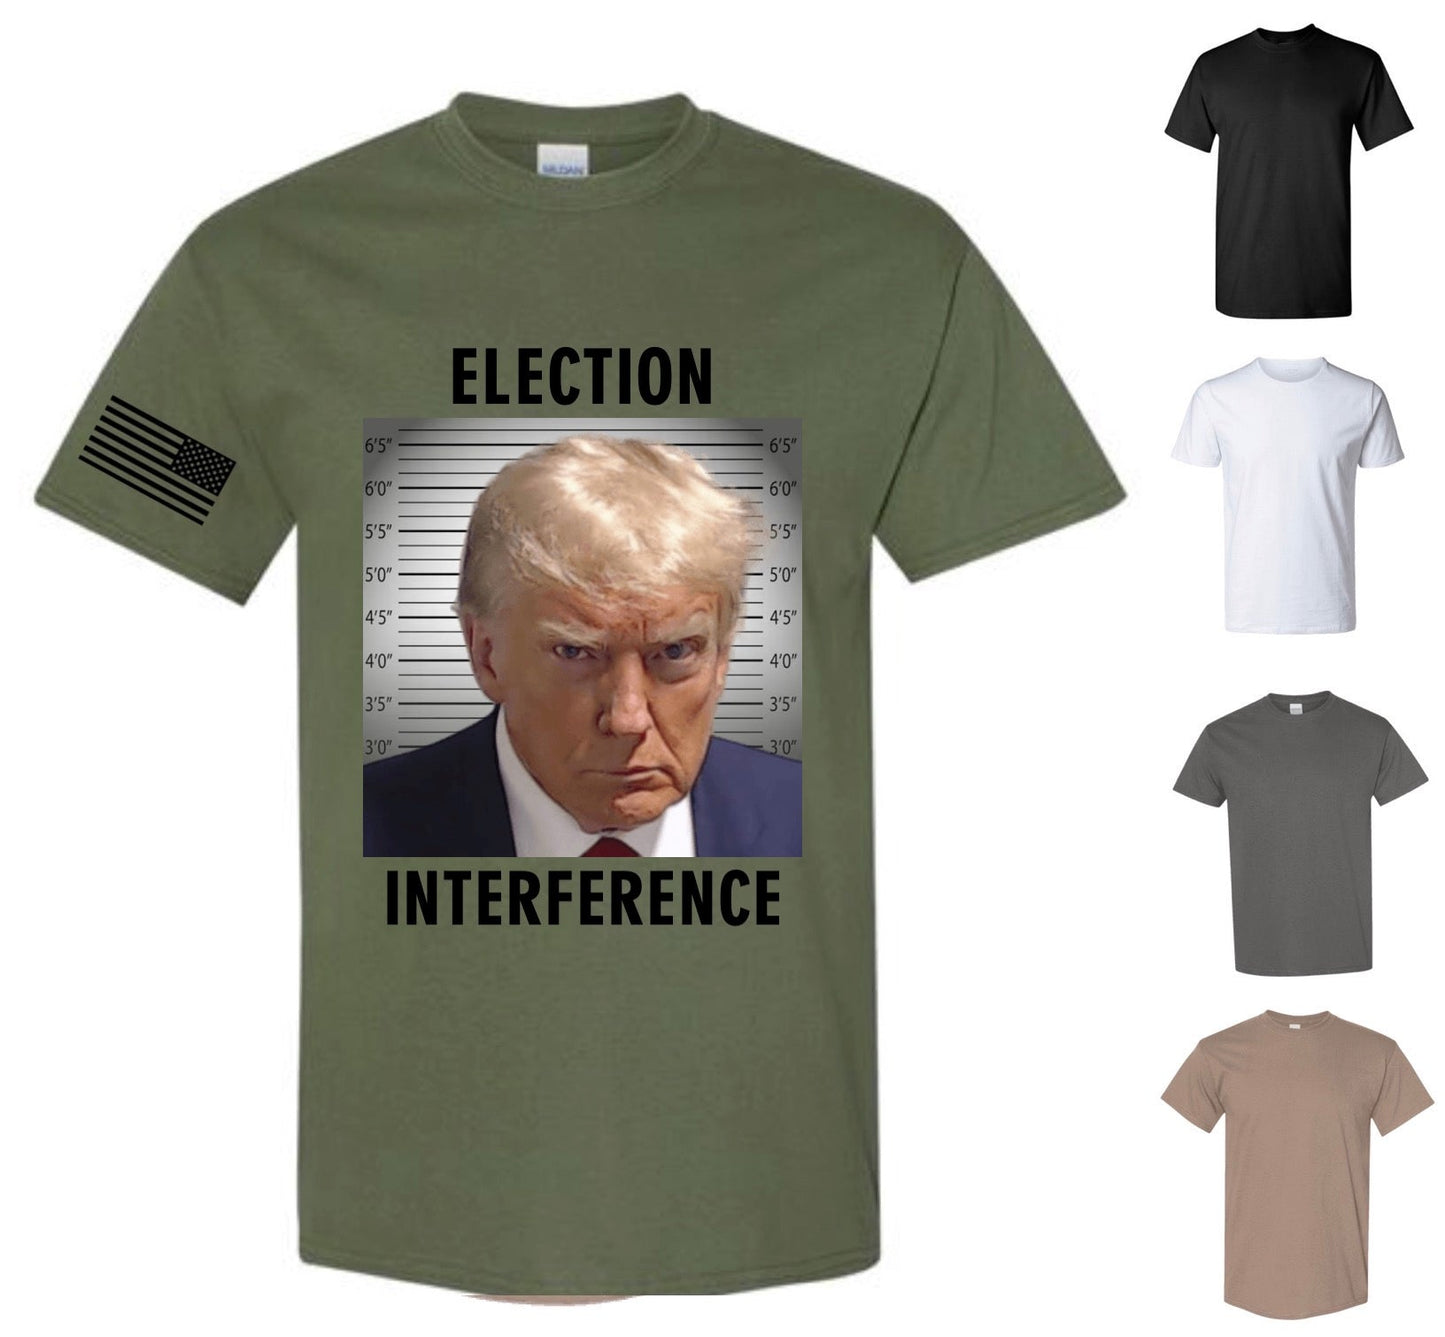 Election Interference T-Shirt — Free Shipping